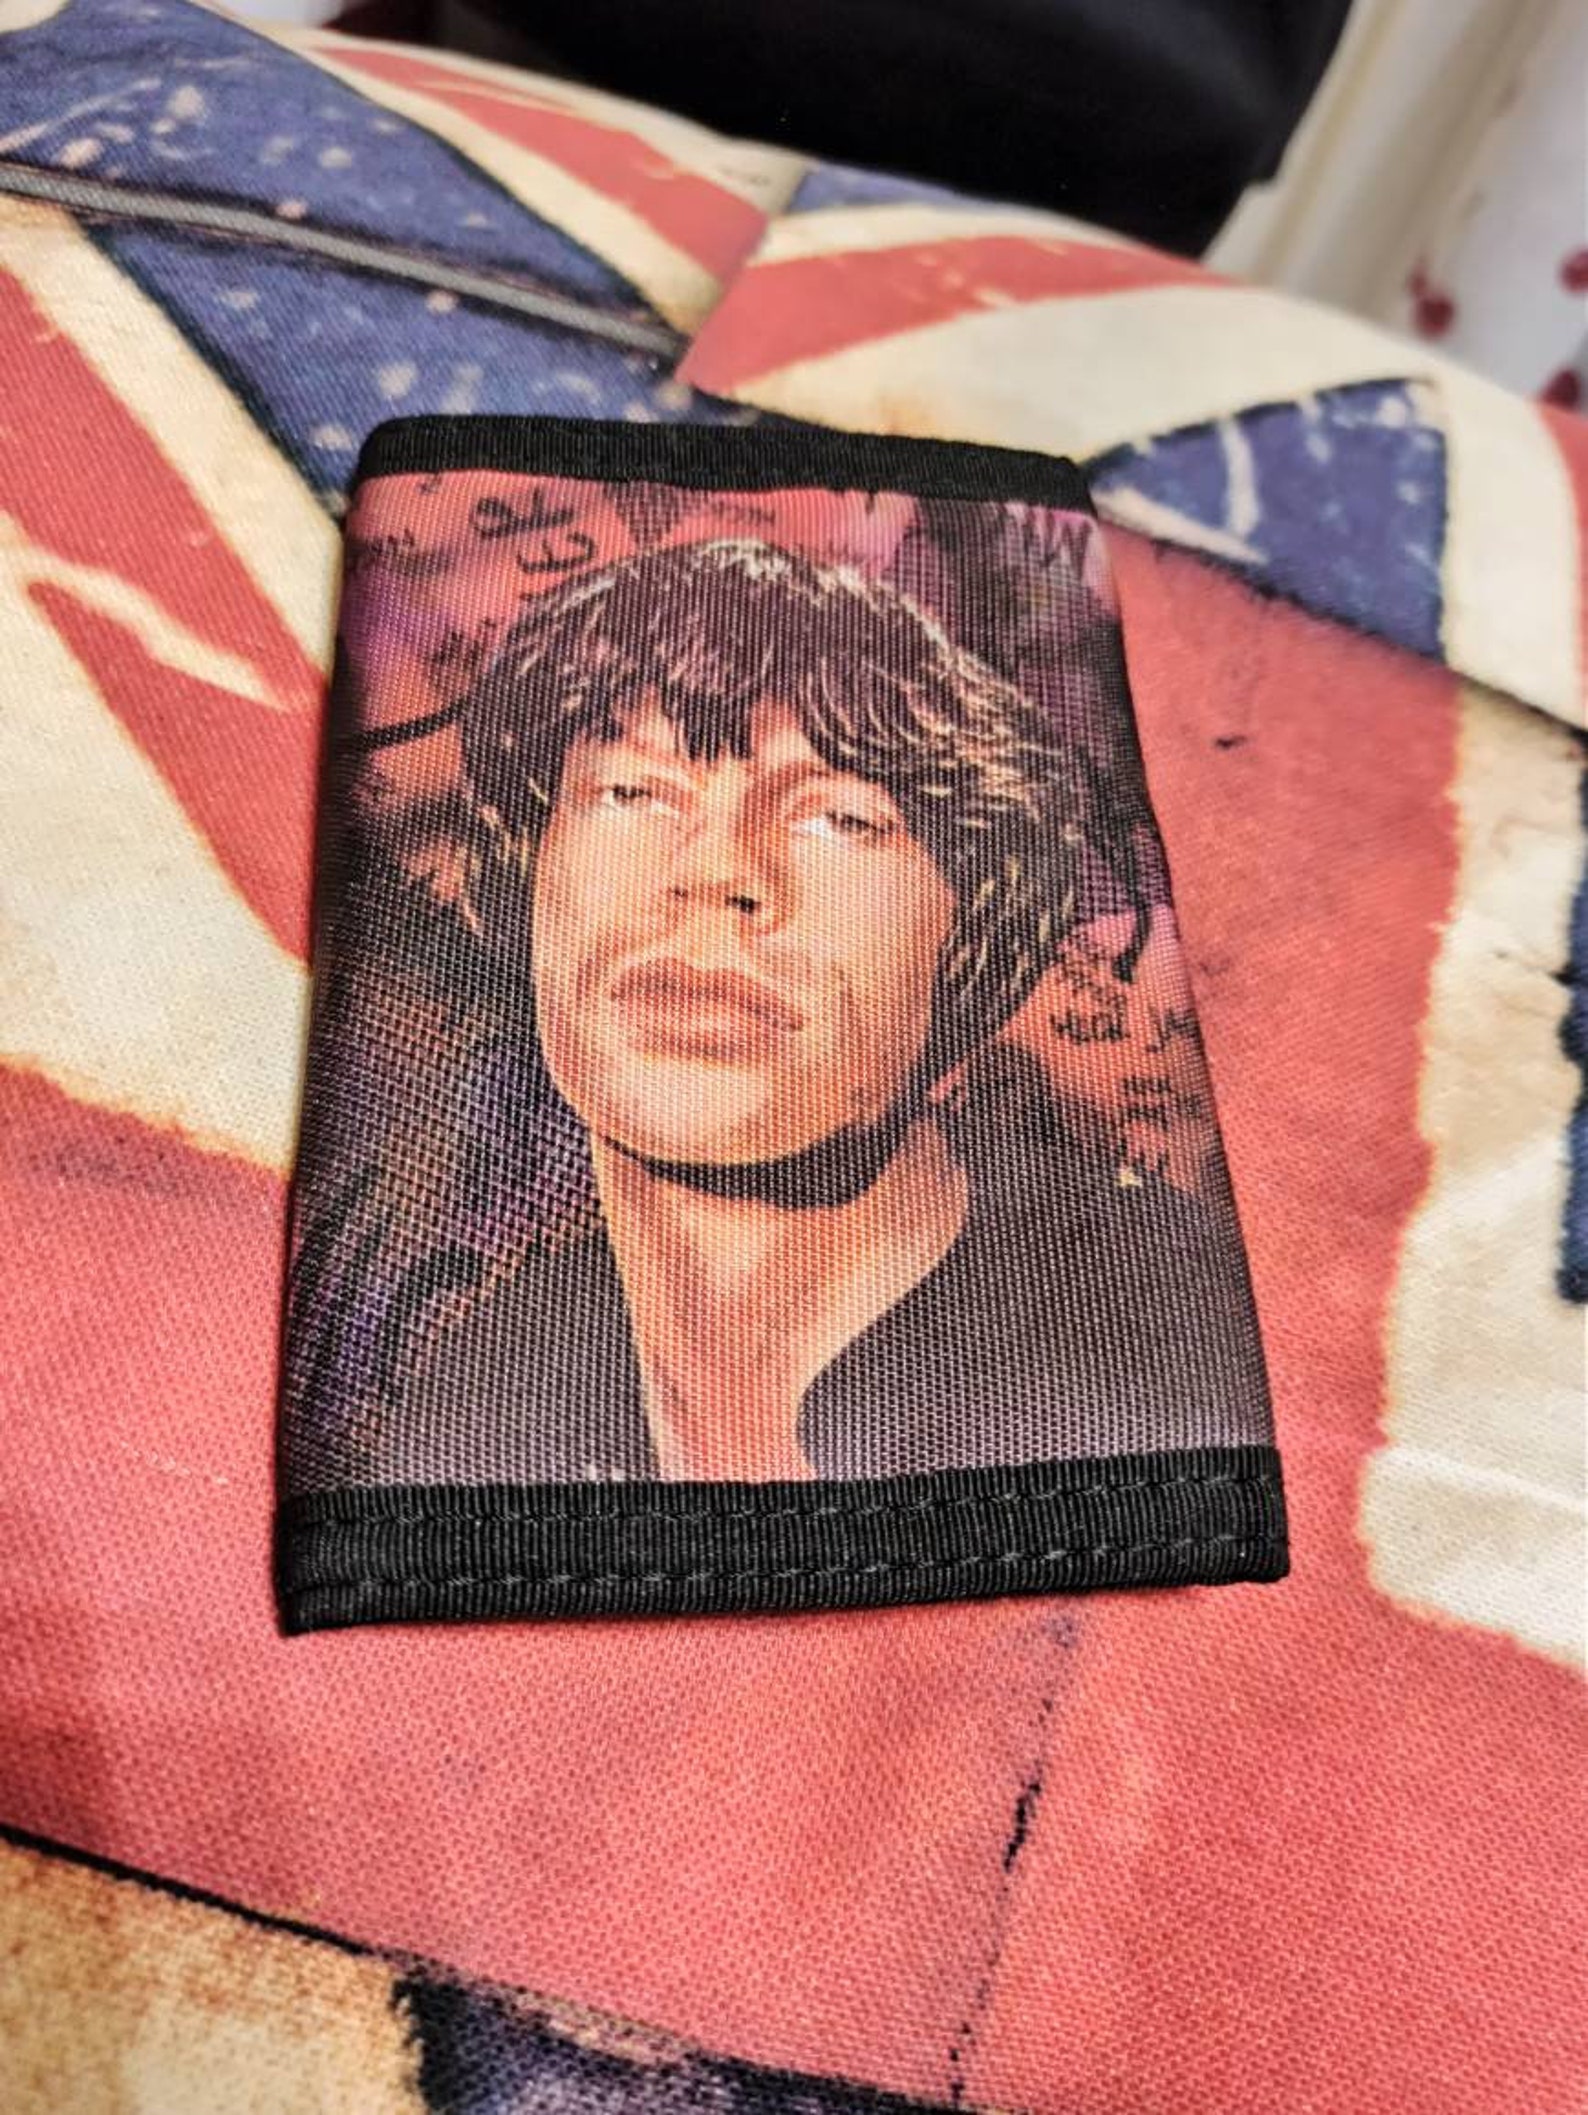 Rolling Stones Vintage Wallet End 80s Early 90s Mick Jagger - Etsy